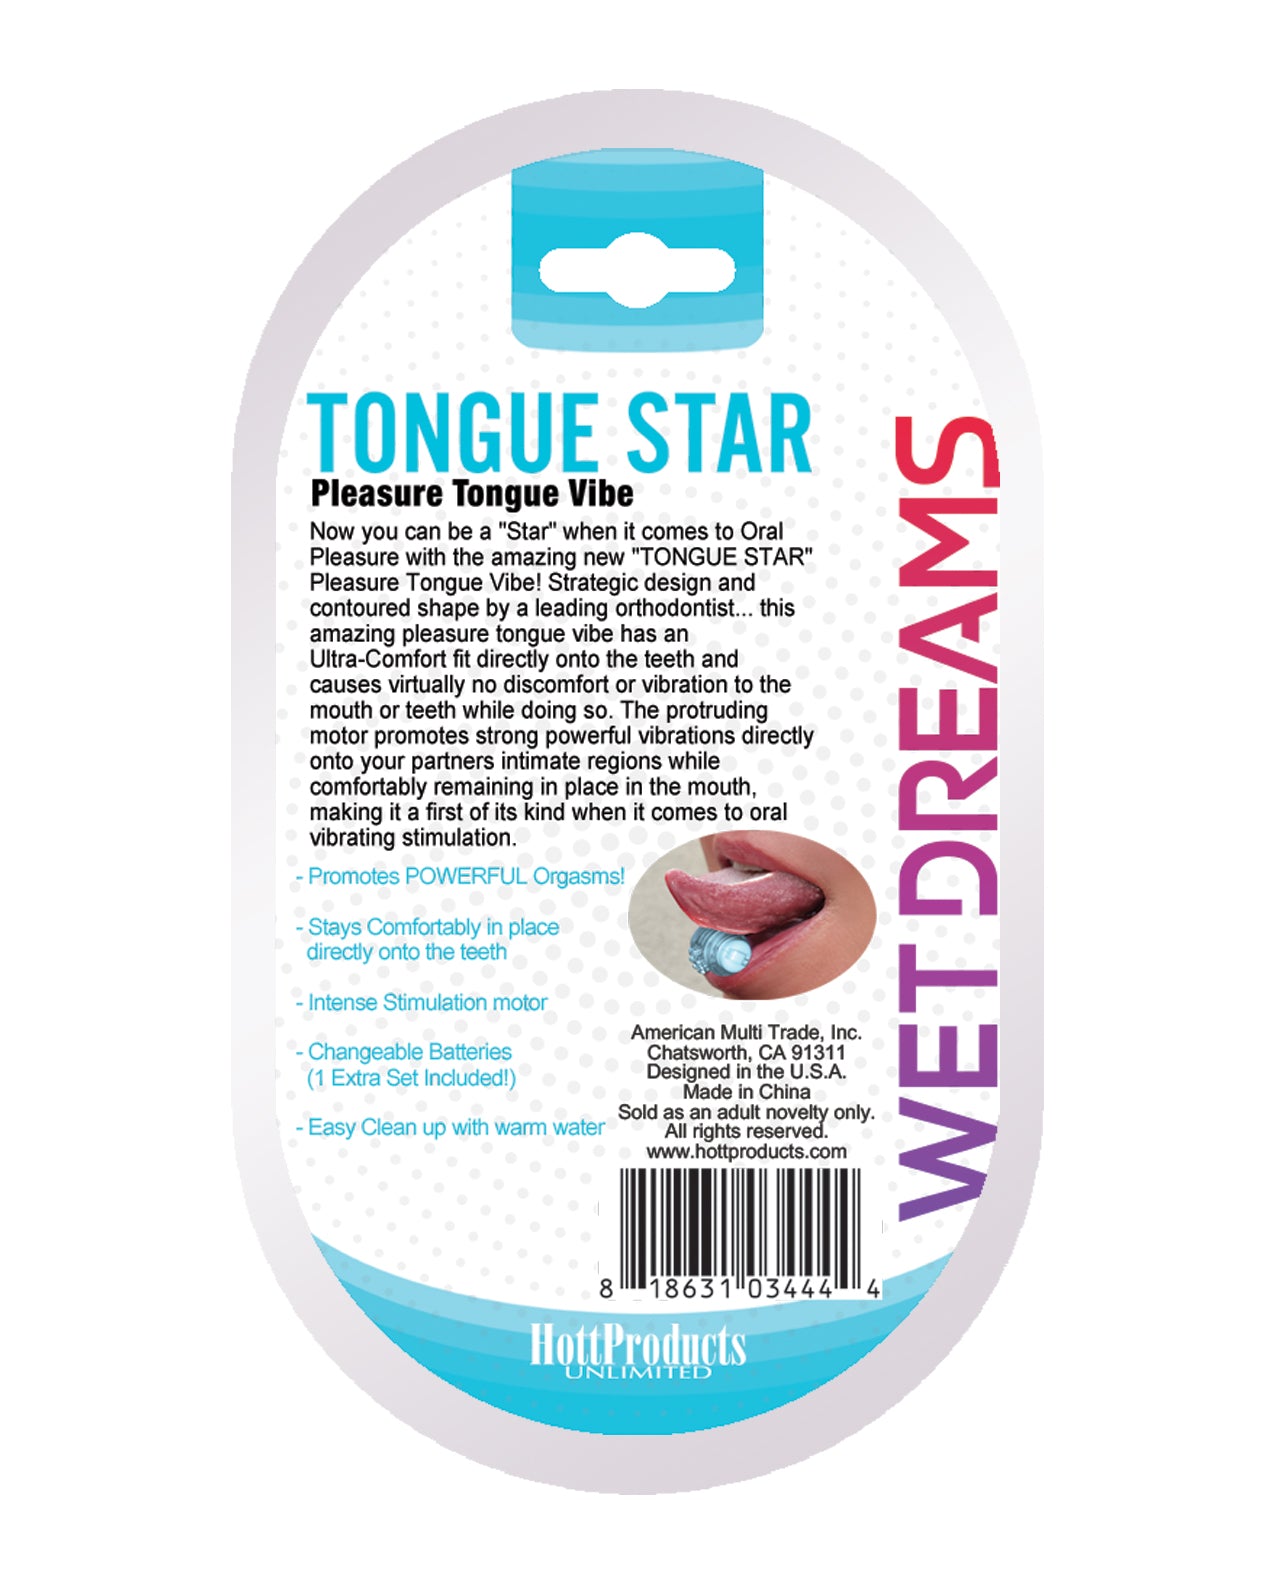 Wet Dreams Tongue Star Vibe by Hott Products